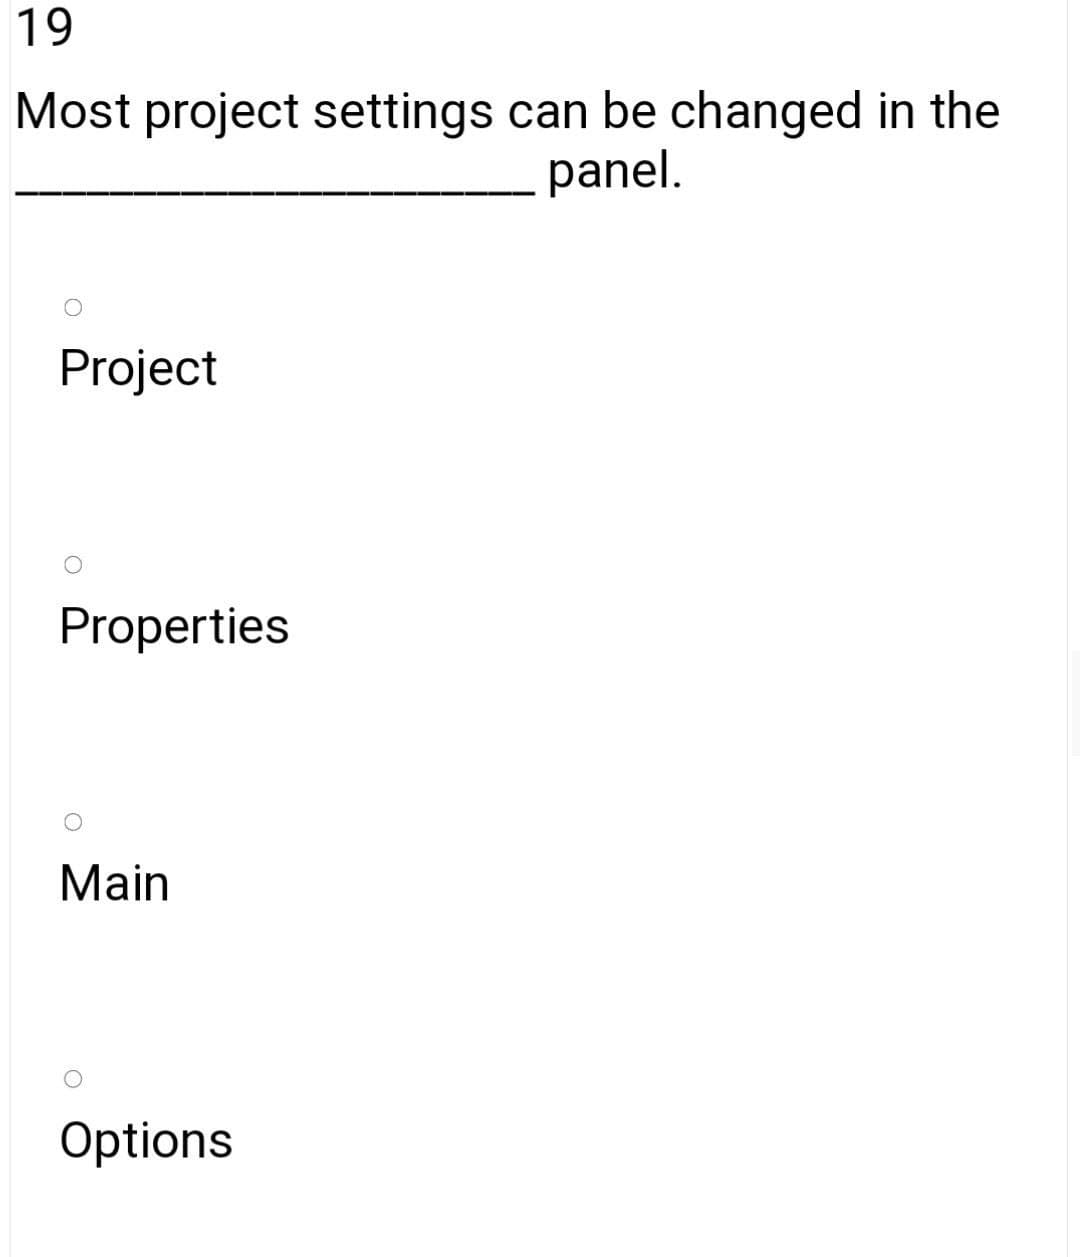 19
Most project settings can be changed in the
panel.
Project
Properties
Main
Options
